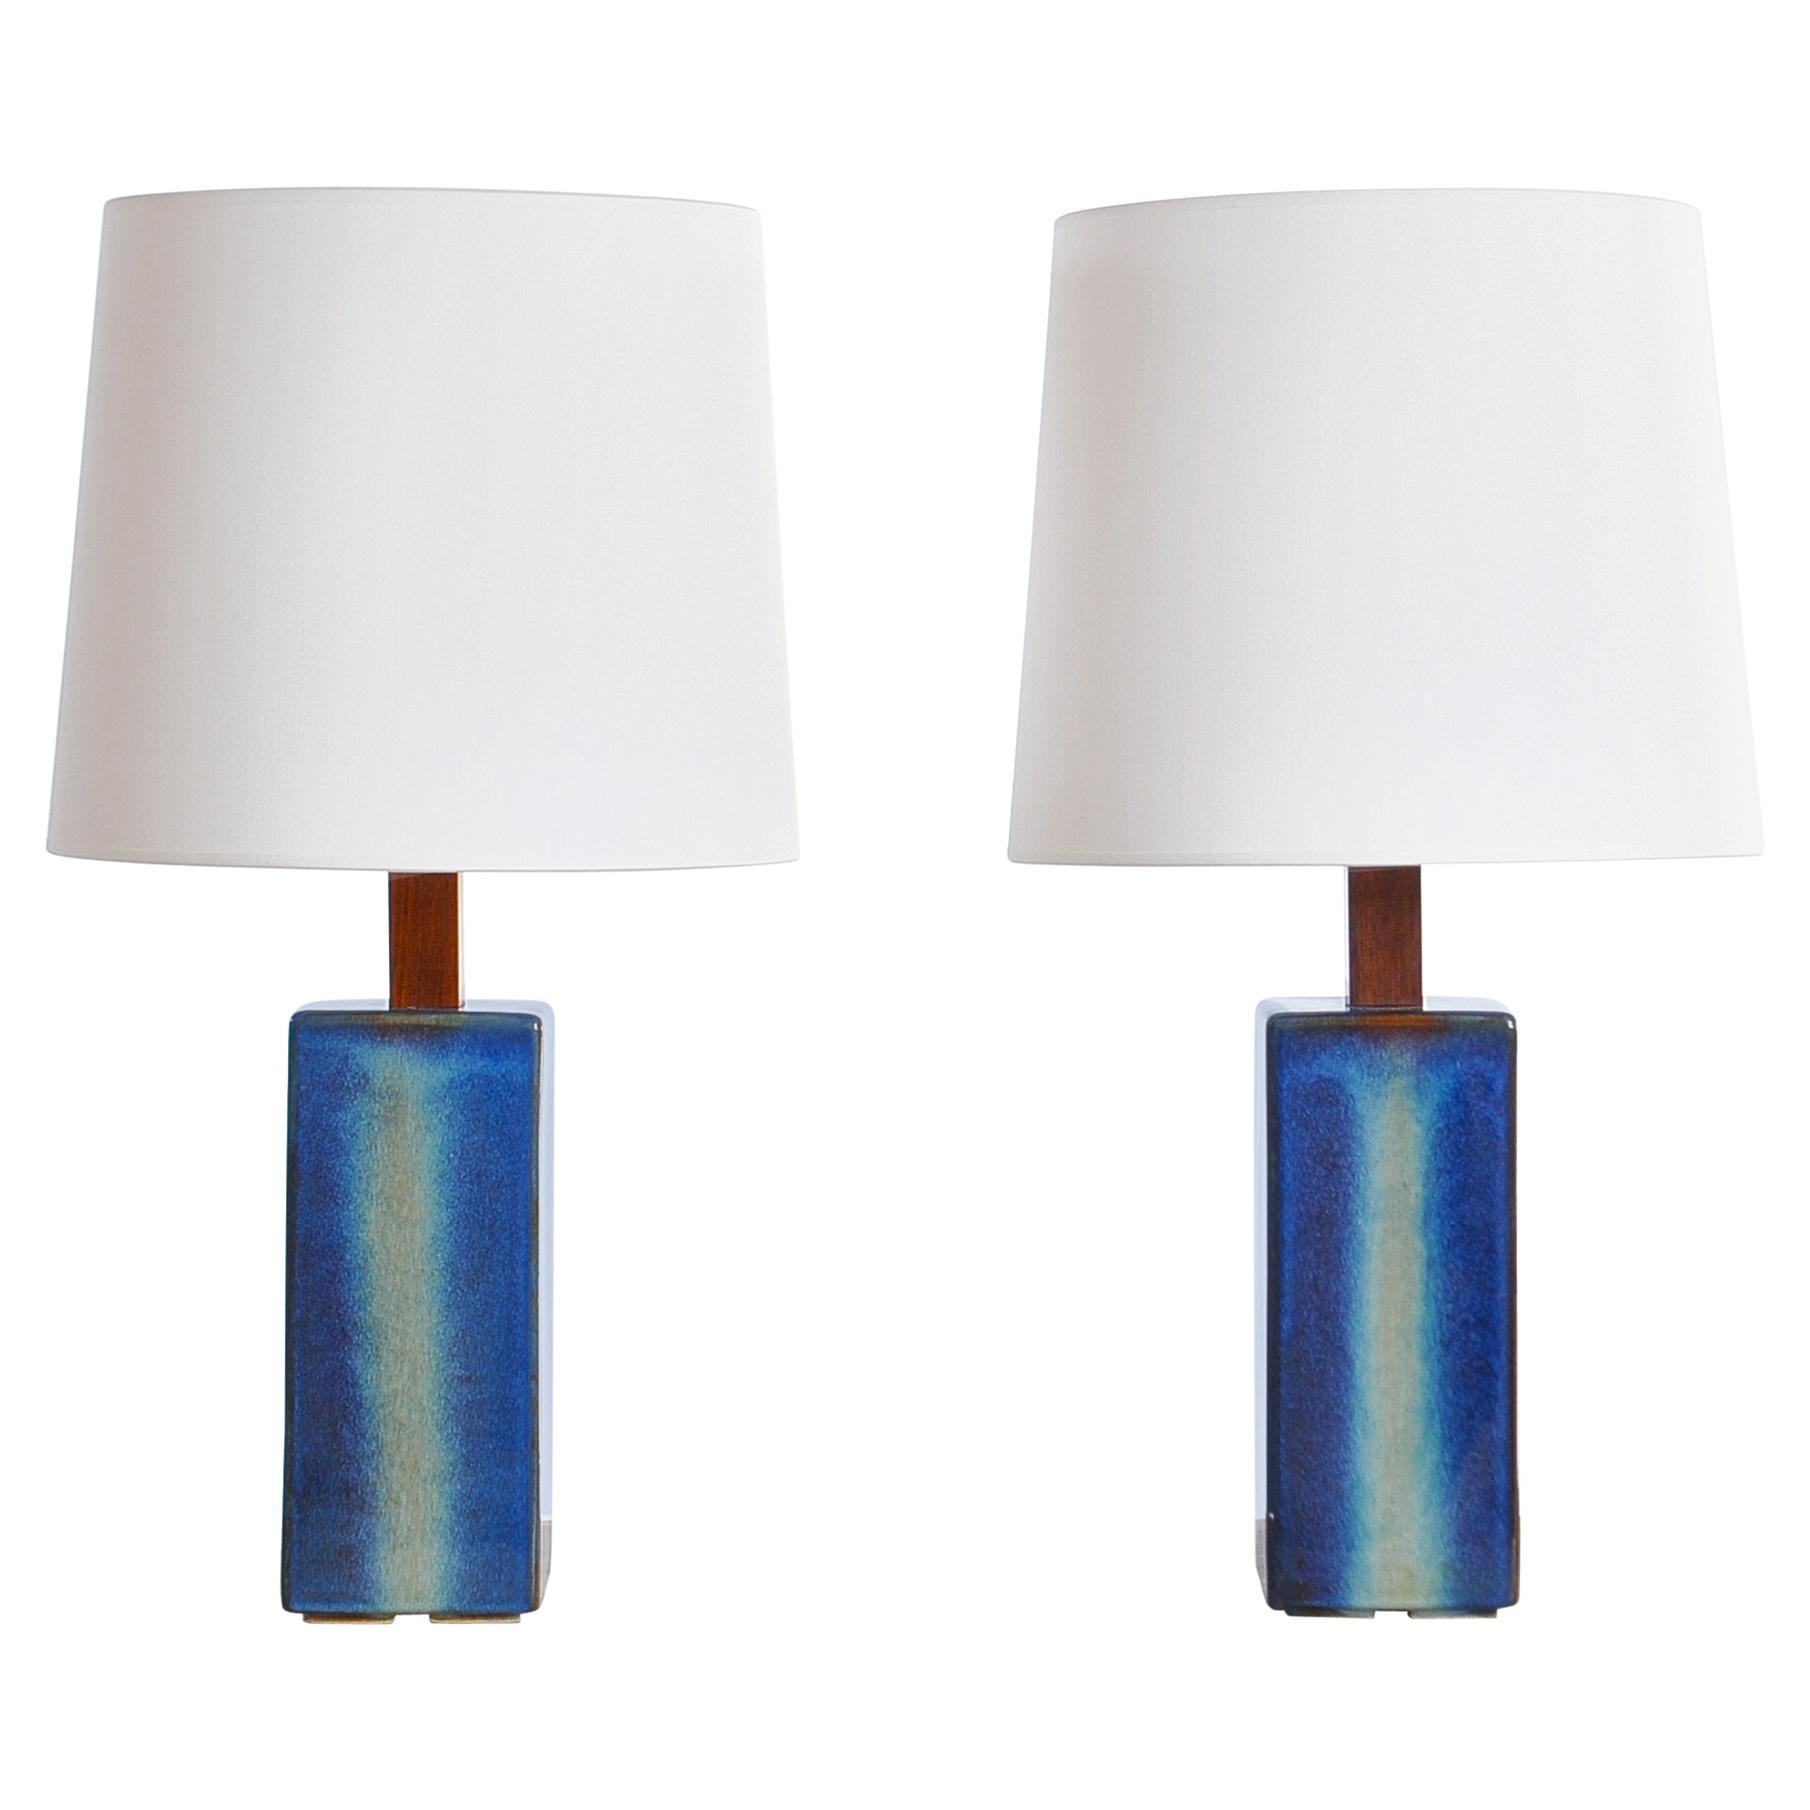 Danish Modern Pair of Large Blue Table Lamps from Søholm Stoneware, 1960s